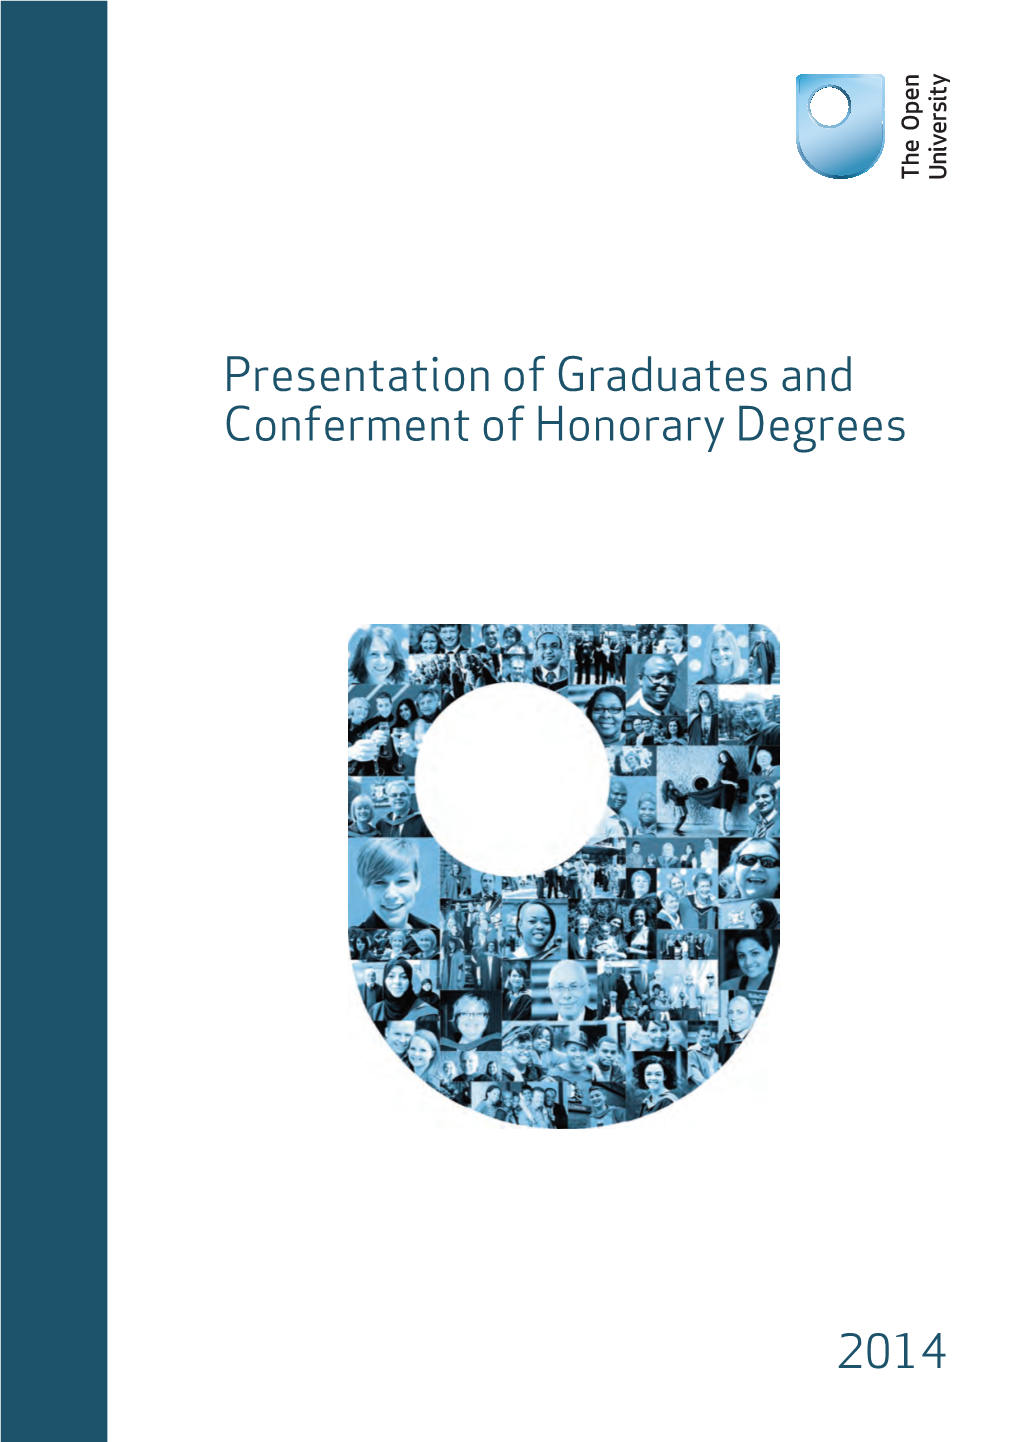 Presentation of Graduates and Conferment of Honorary Degrees